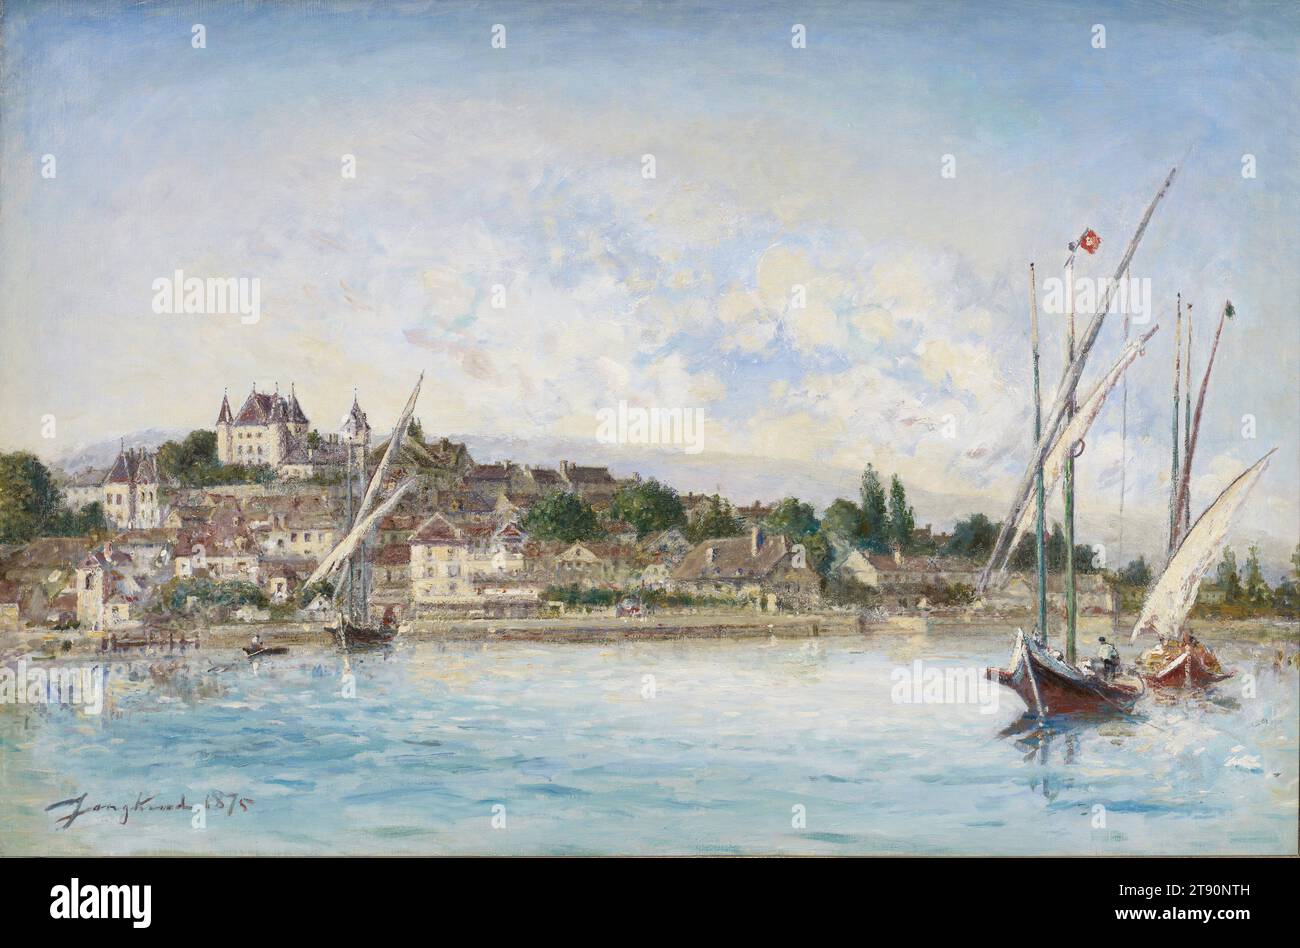 View of Lake Léman at Nyon, 1875, Johan Barthold Jongkind, Dutch, 1819 - 1891, 24 x 34 in. (60.96 x 86.36 cm) (canvas)29 3/4 x 41 x 4 1/4 in. (75.57 x 104.14 x 10.8 cm) (outer frame), Oil on canvas, Netherlands, 19th century, Born and trained in Holland, Jongkind became a pioneer of outdoor painting in France. The immediacy of his broken brushwork and lively color impressed the young Claude Monet. After the two artists pained together along the coast of Normandy in the early 1860s, Monet commented, 'From that time he was my real master' Stock Photo